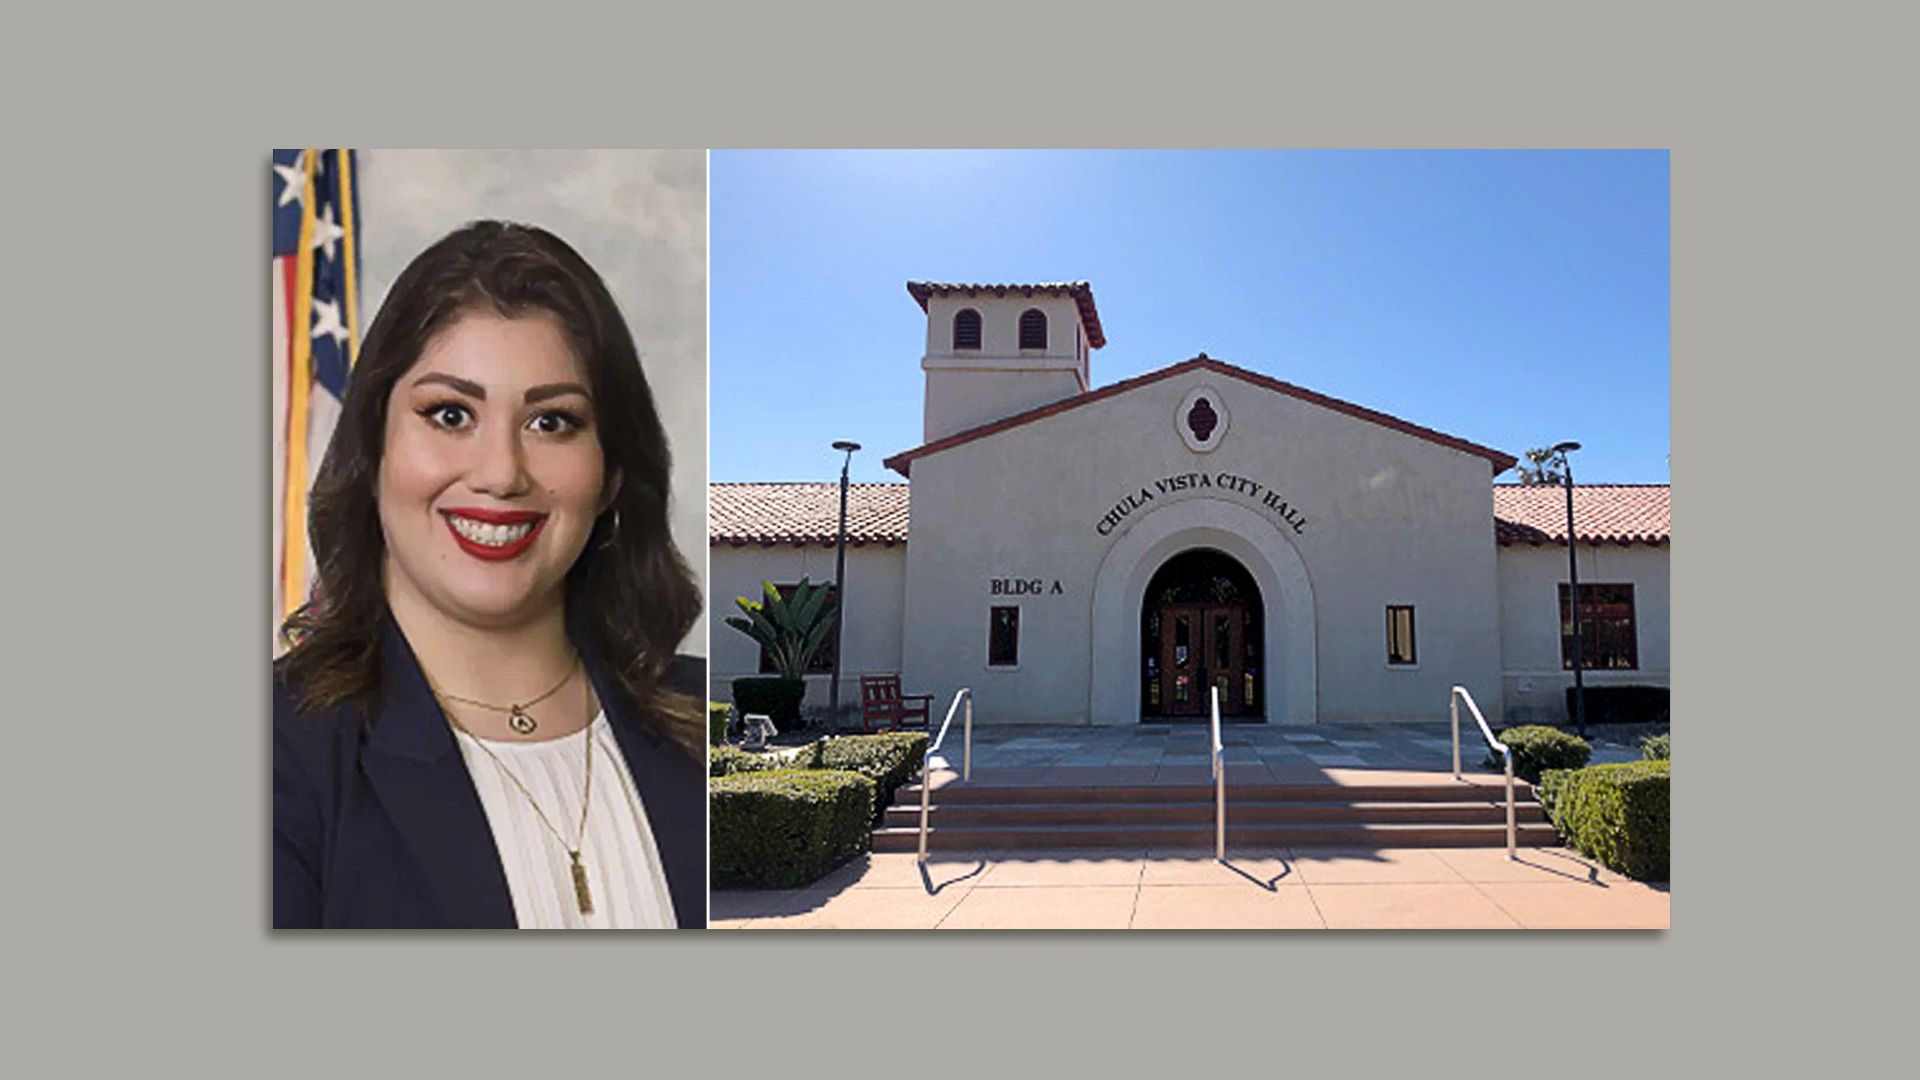 Side by side images of Councilwoman Andrea Cardenas and the Chula Vista City Hall